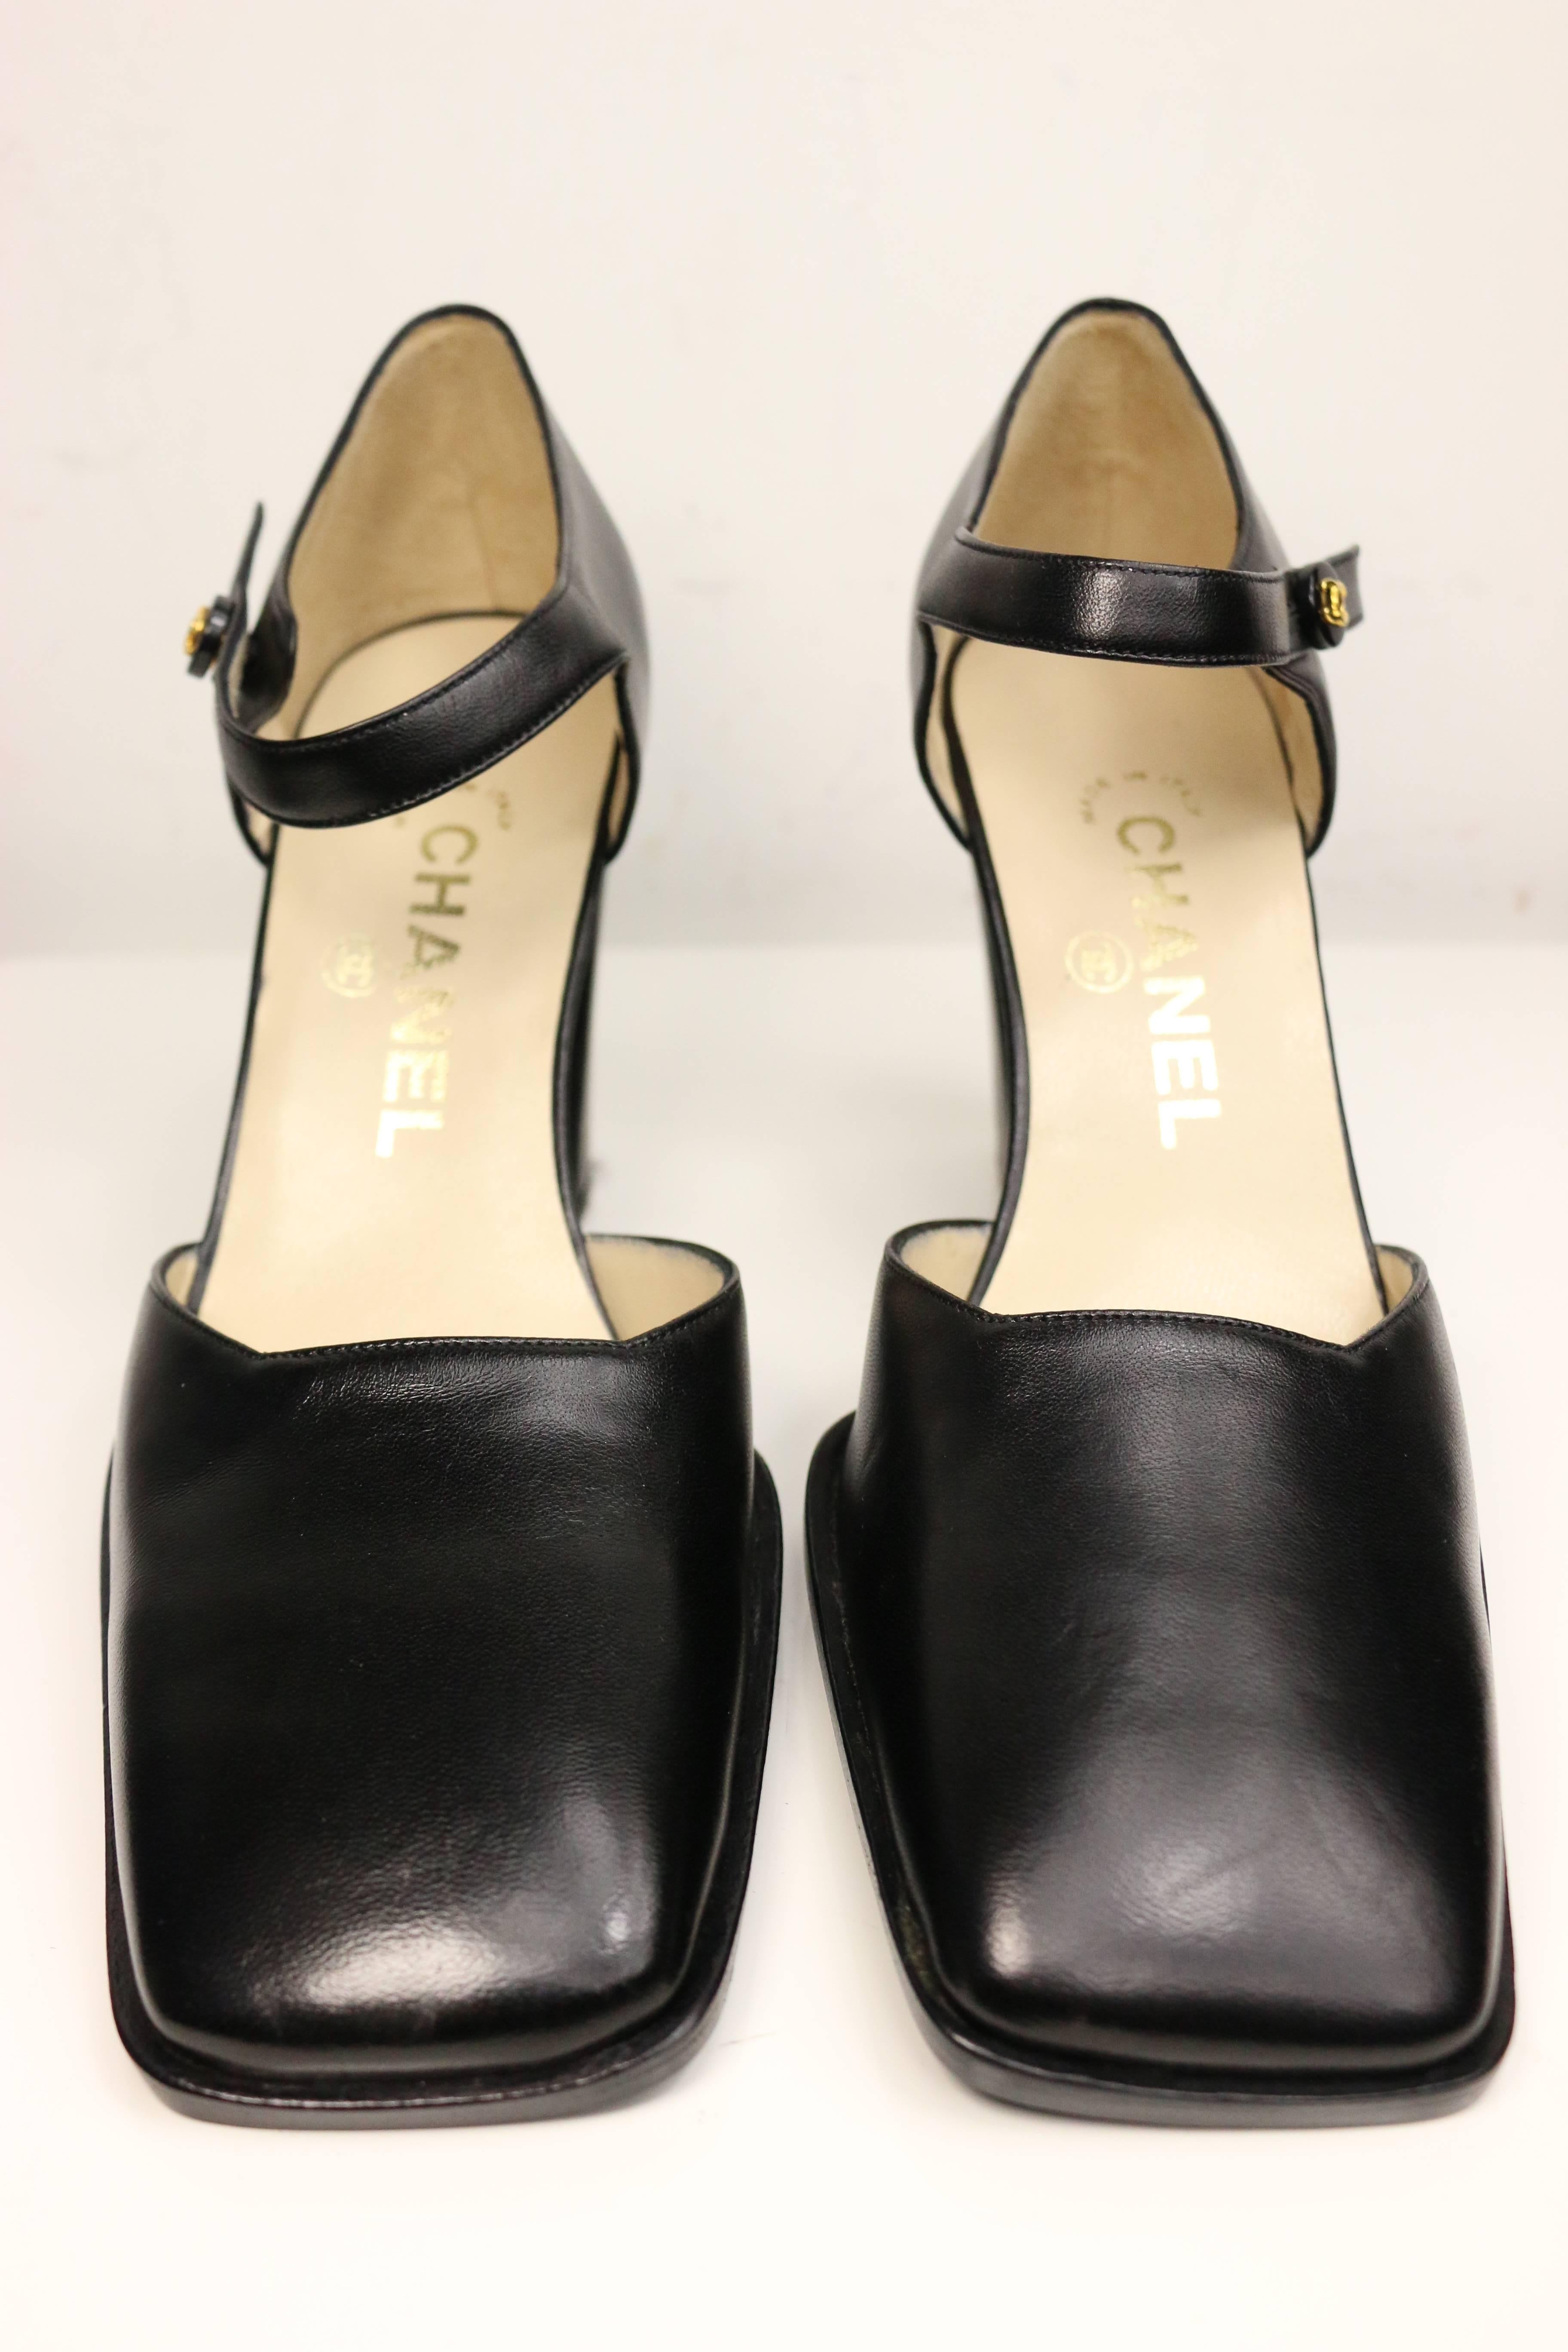 - Vintage 90s Chanel classic black leather square toe heels. Featuring gold 